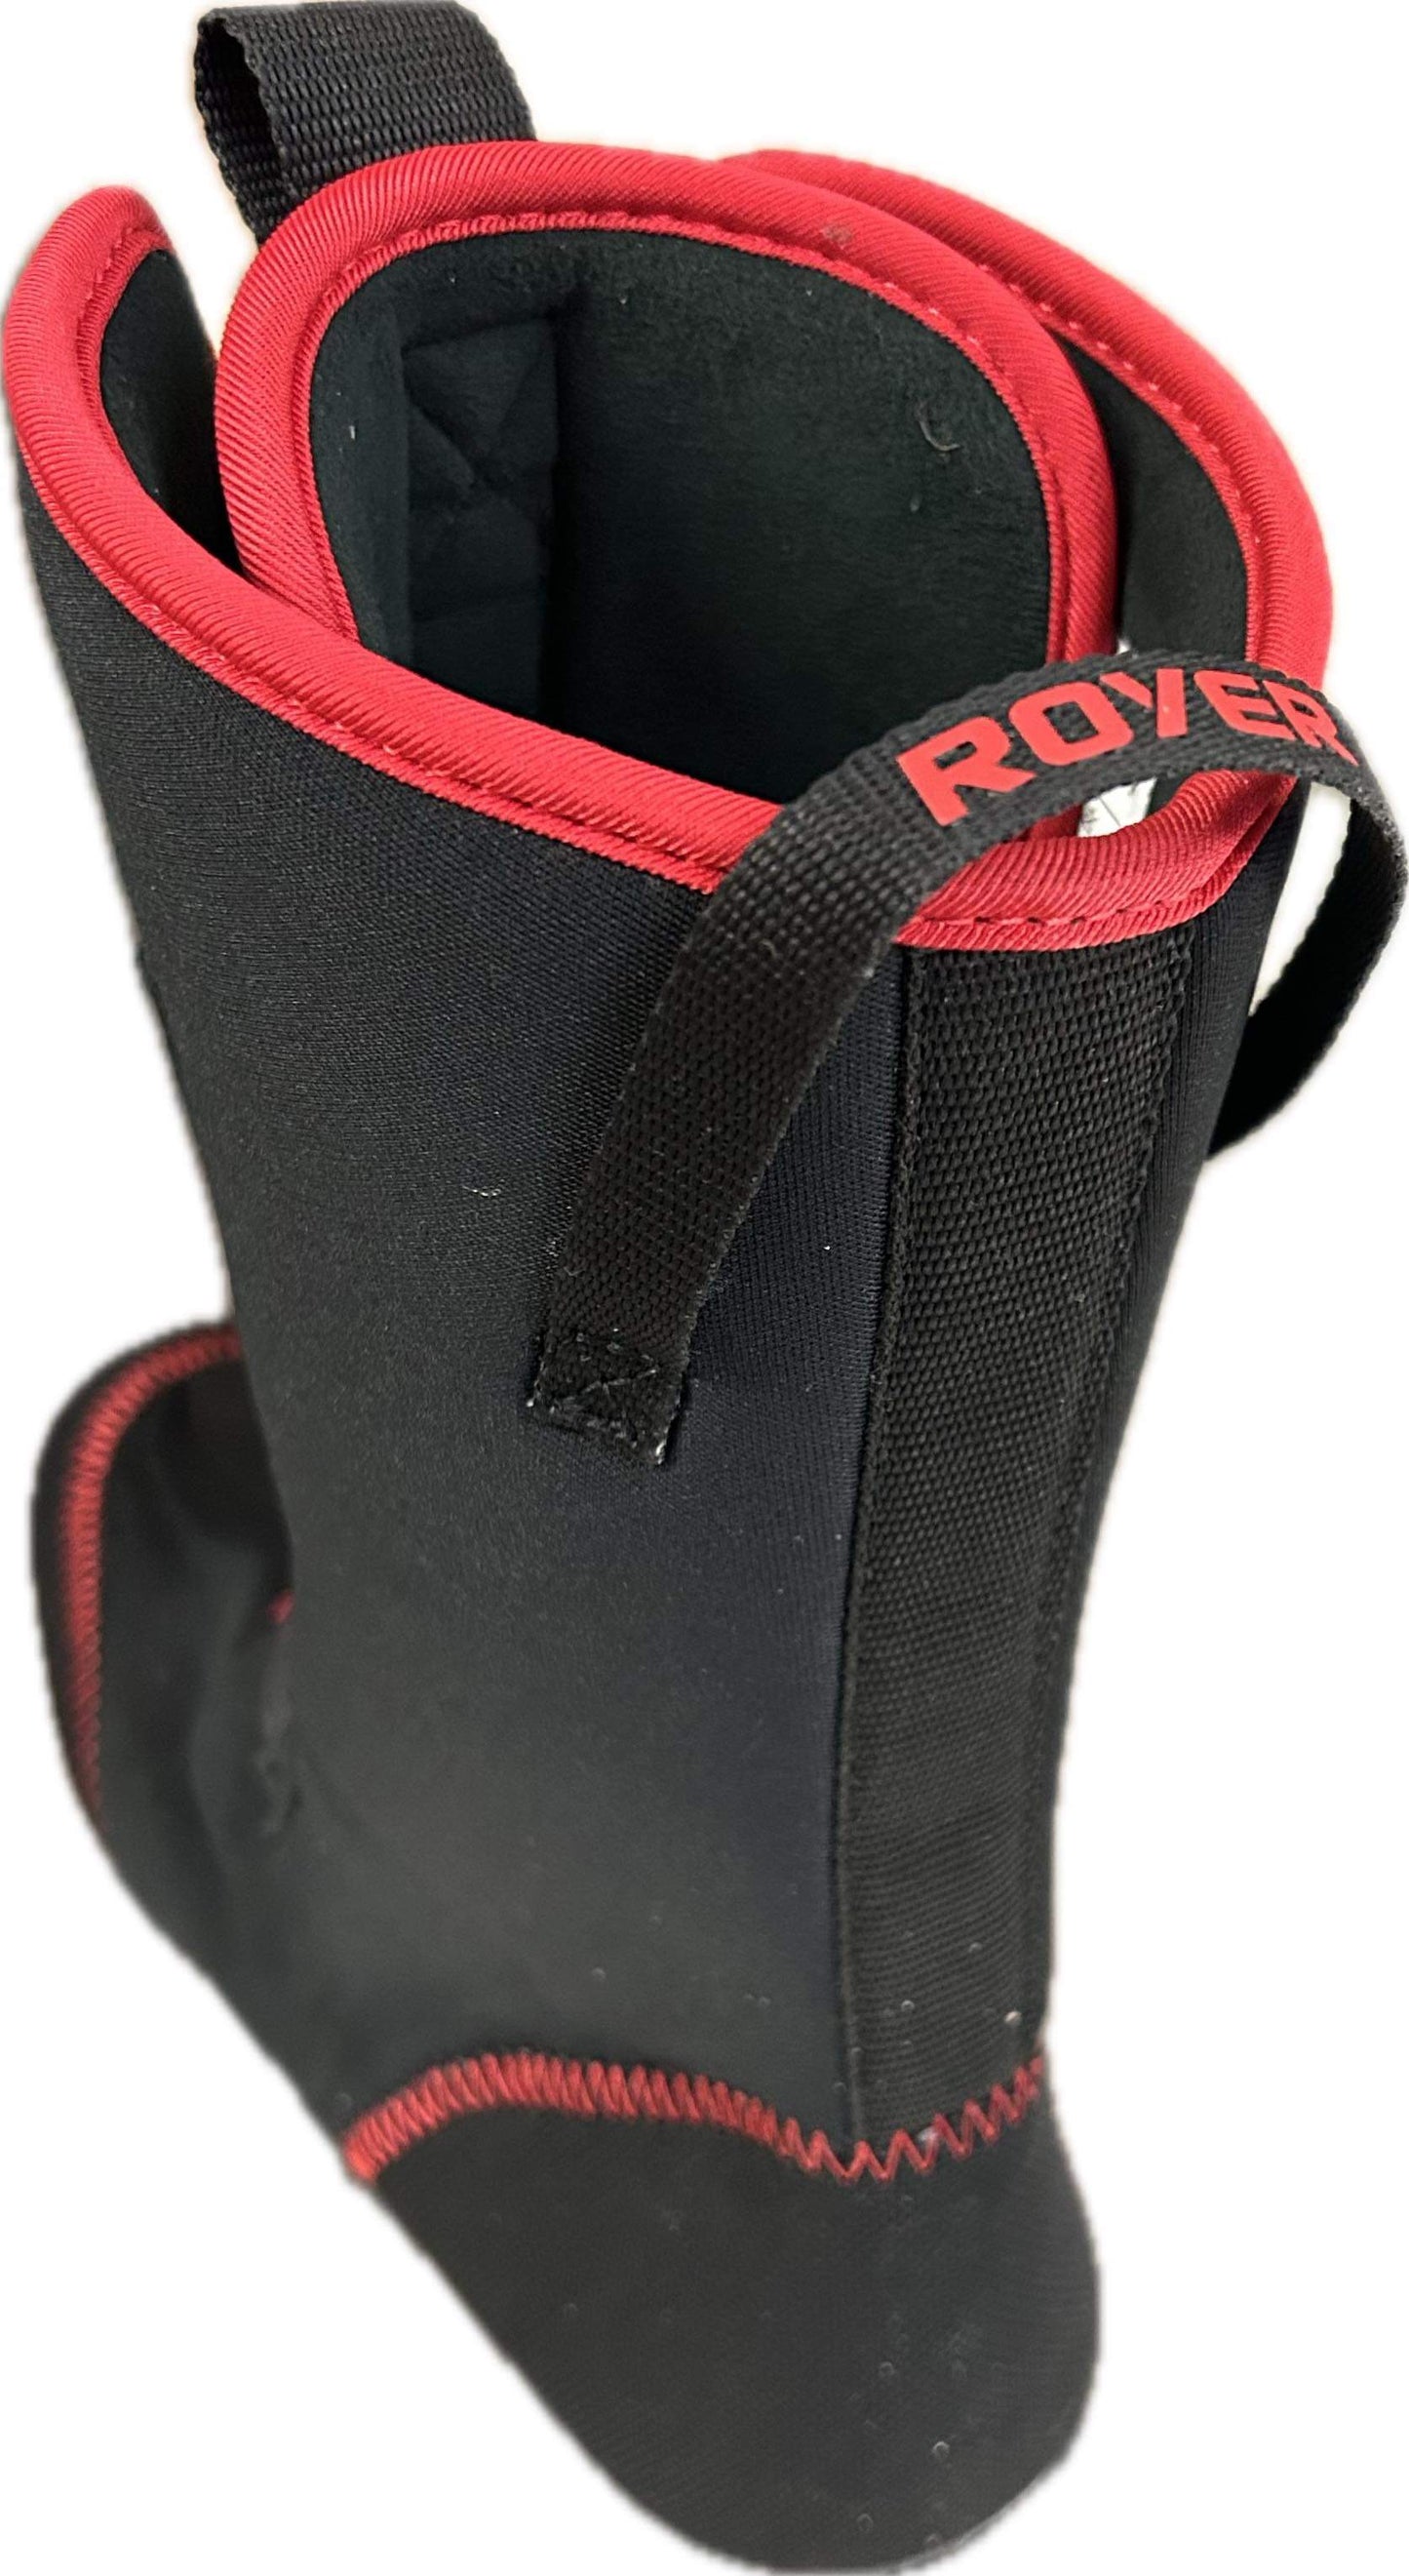 ROYER GLACIUS BOOT WITH FELT -60 CSA 10 INCHES BLACK 9000GL